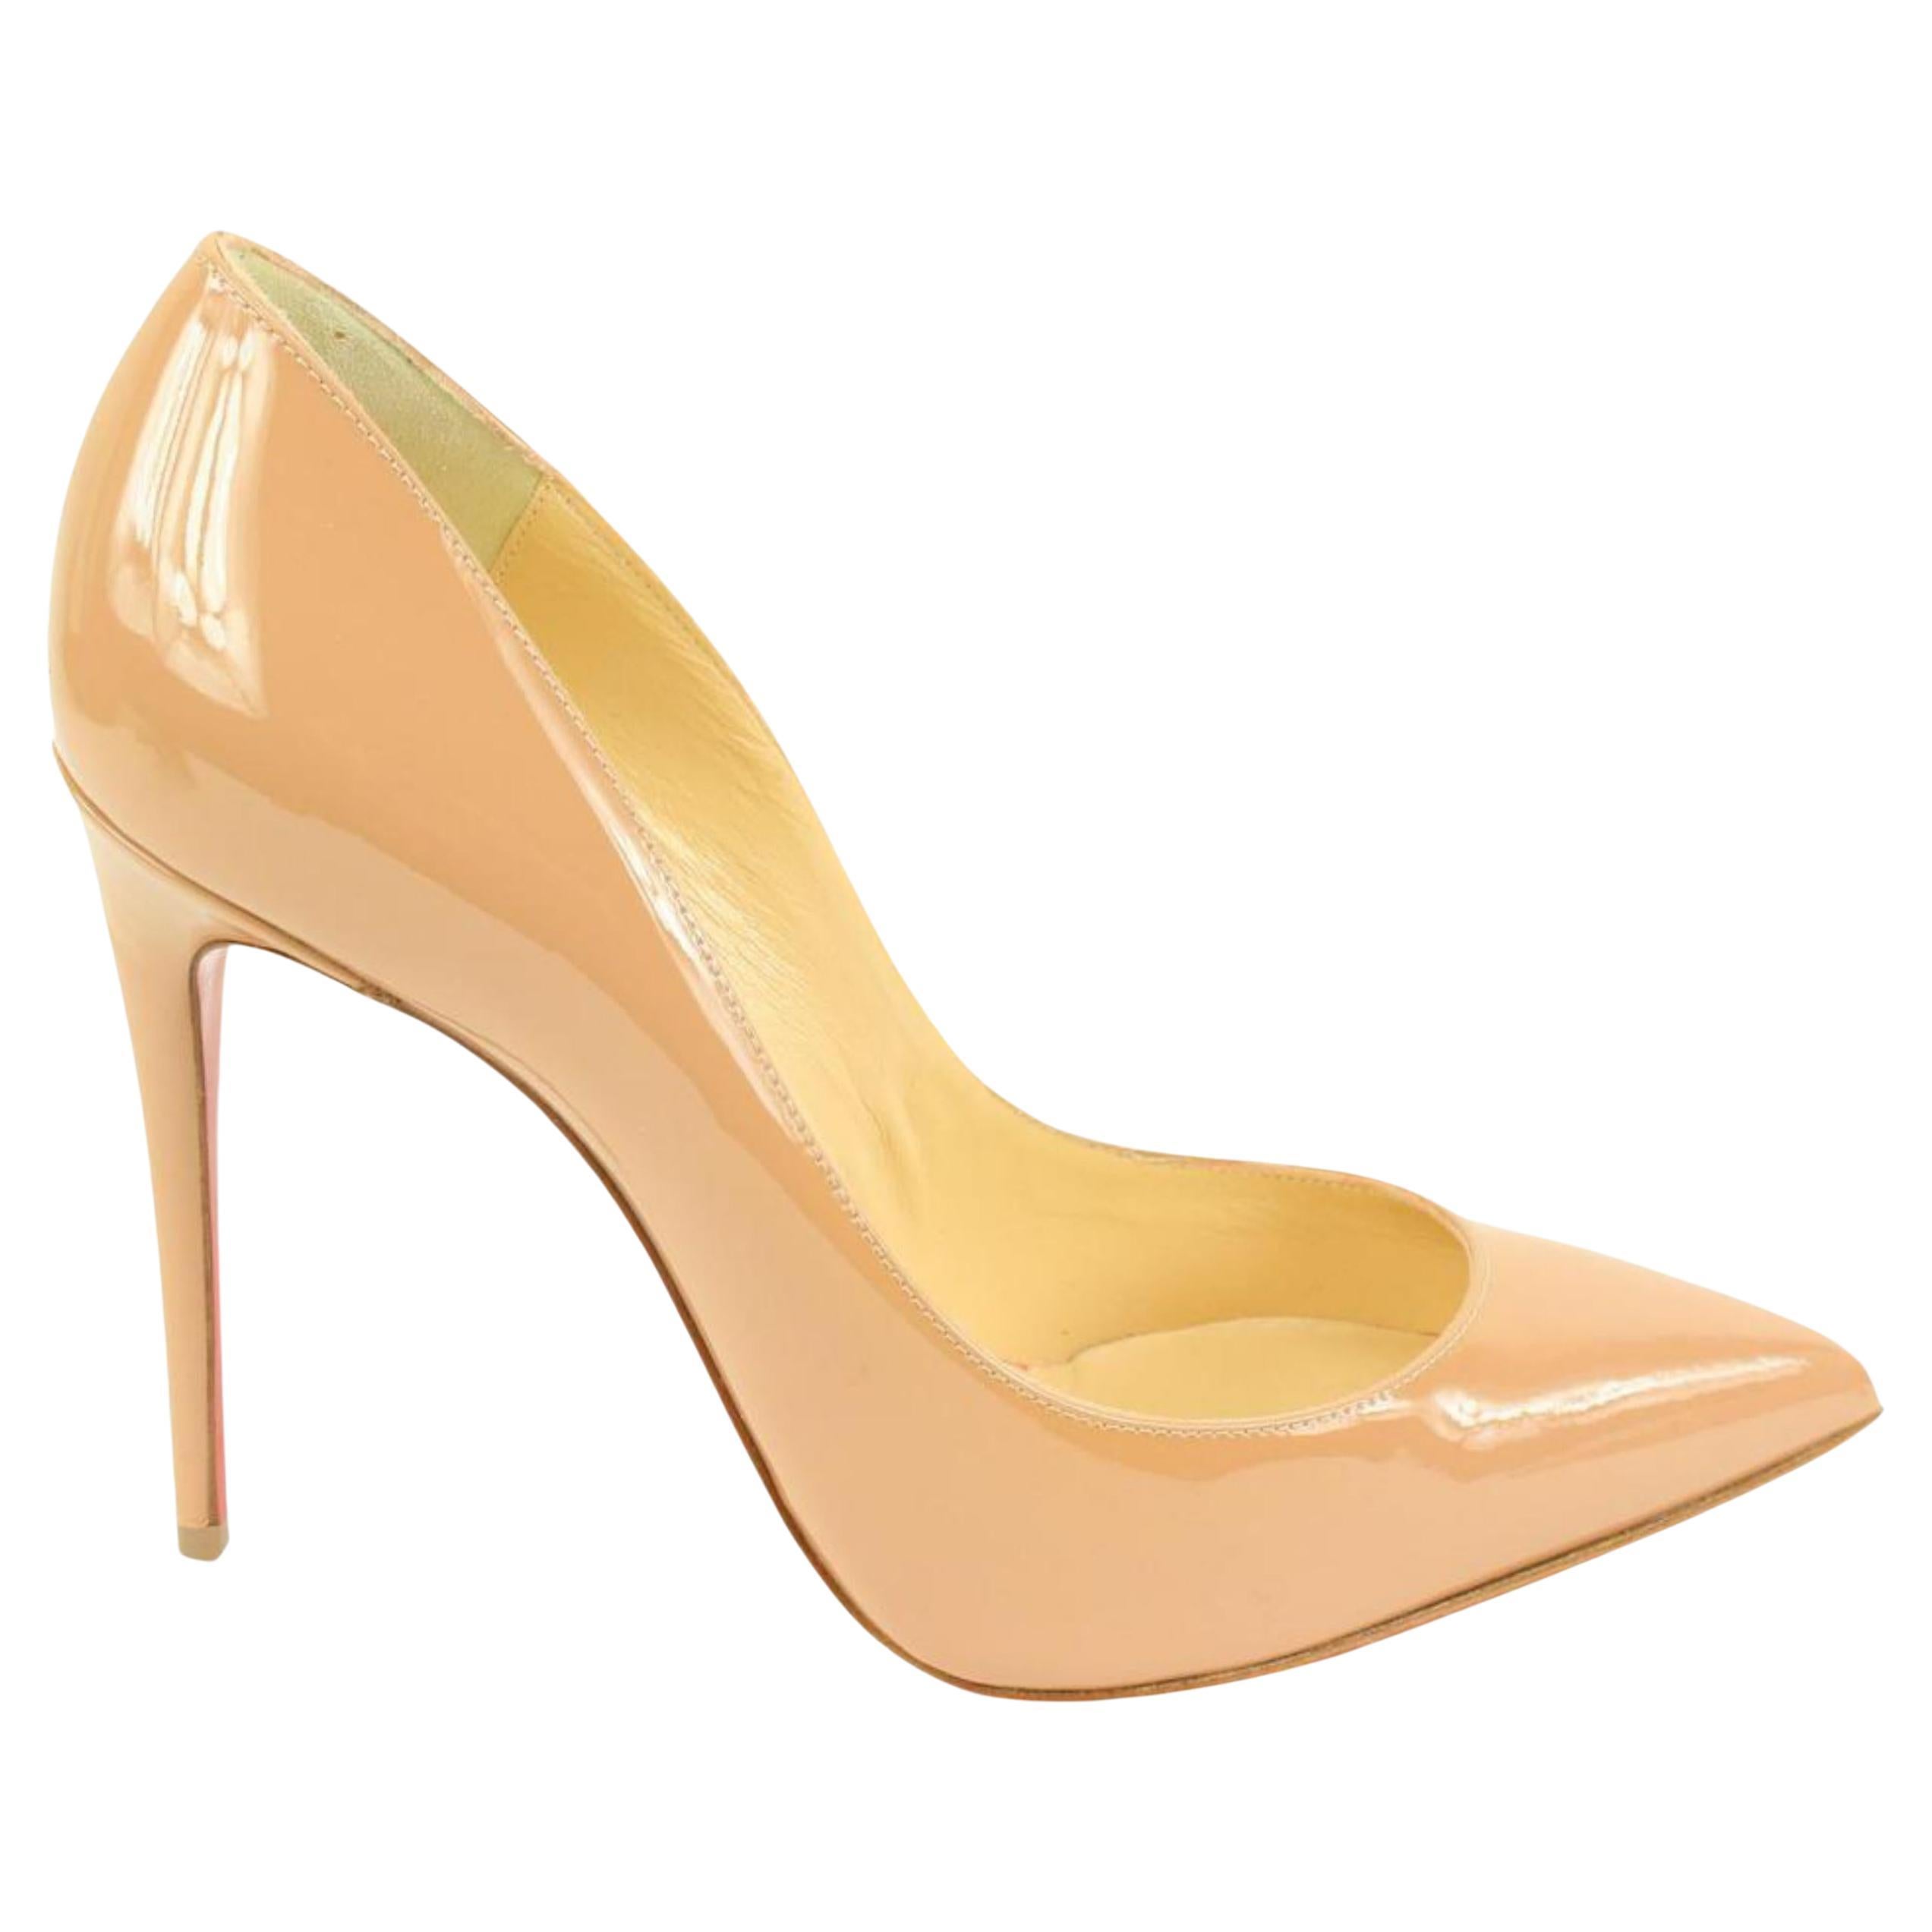 Christian Louboutin Size 36.5 Nude Pigalle Follies Heels 79cl317s